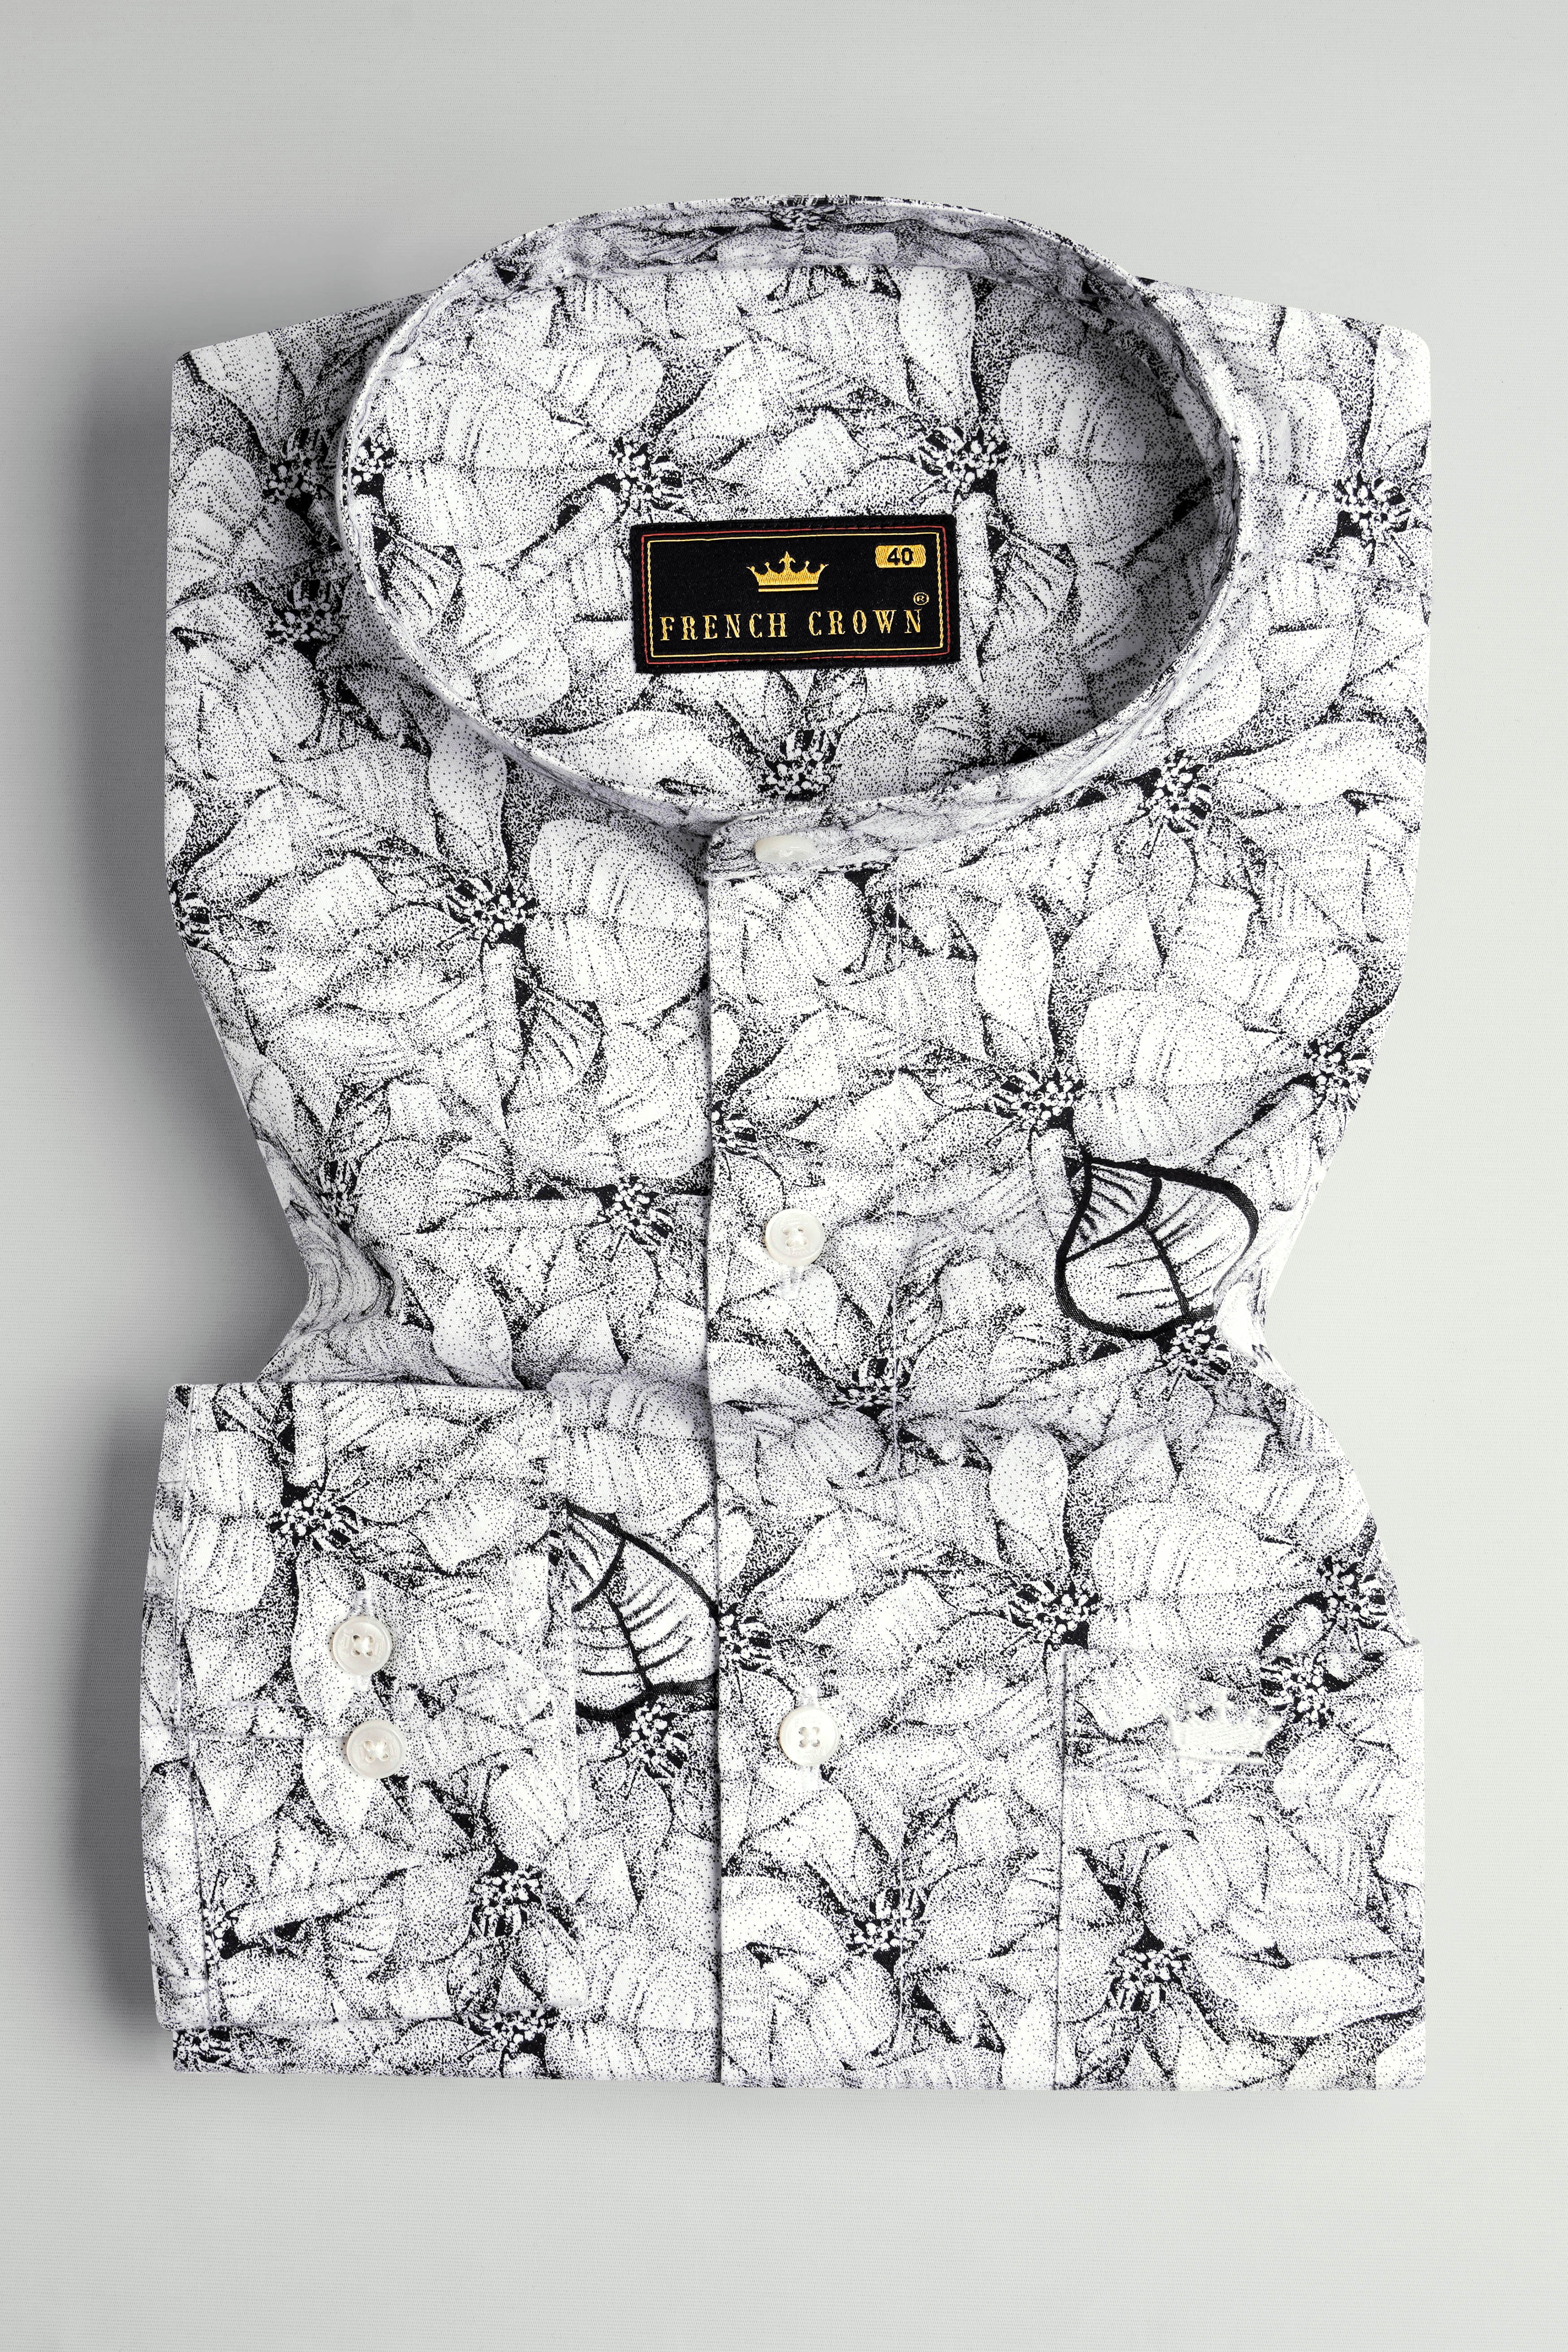 Bright White with Black Leaves Hand Painted Twill Premium Cotton Designer Shirt